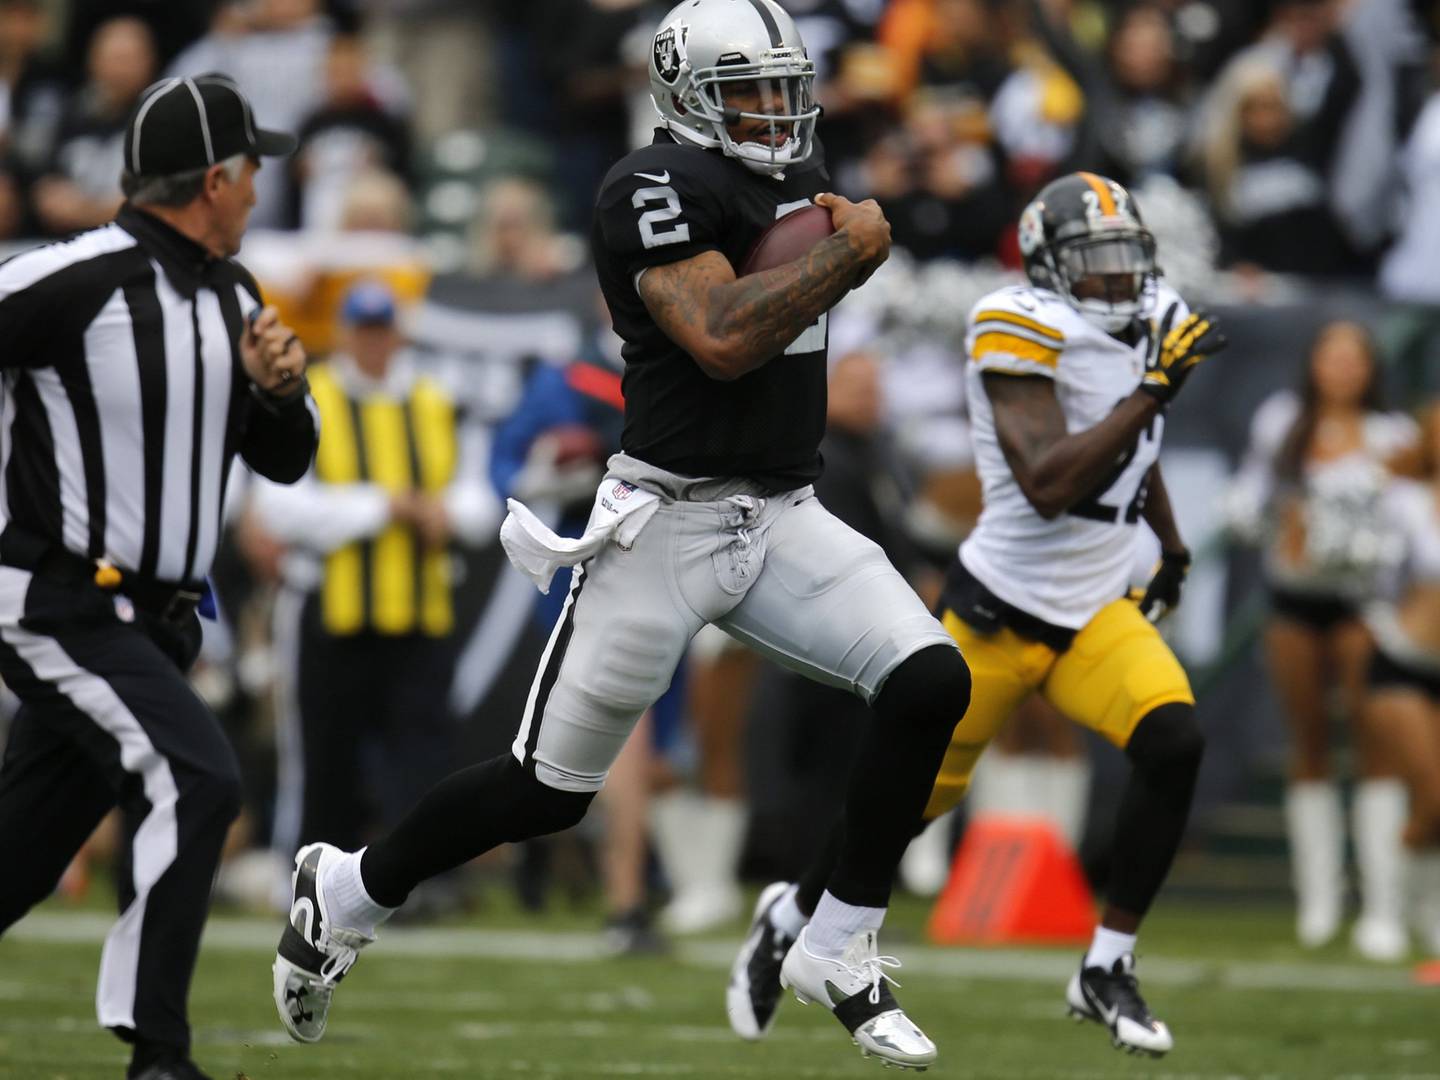 Raiders quarterback Terrelle Pryor runs for a 93-yard touchdown against the Steelers on Oct. 27, 2013, in Oakland, Calif. 